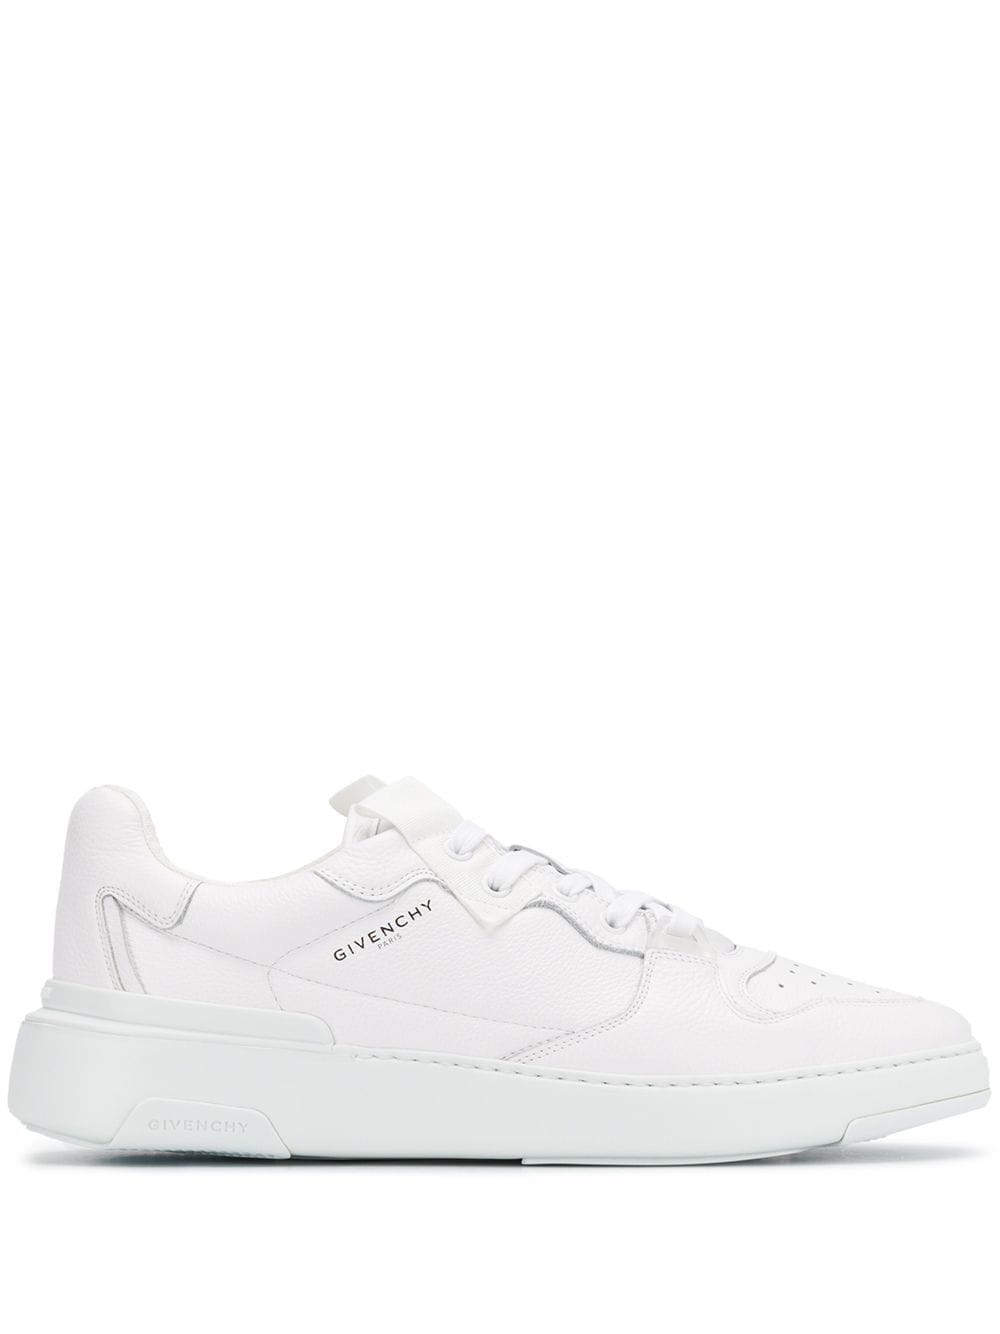 Wing Low Sneakers мъжки обувки Givenchy 1983634712_39